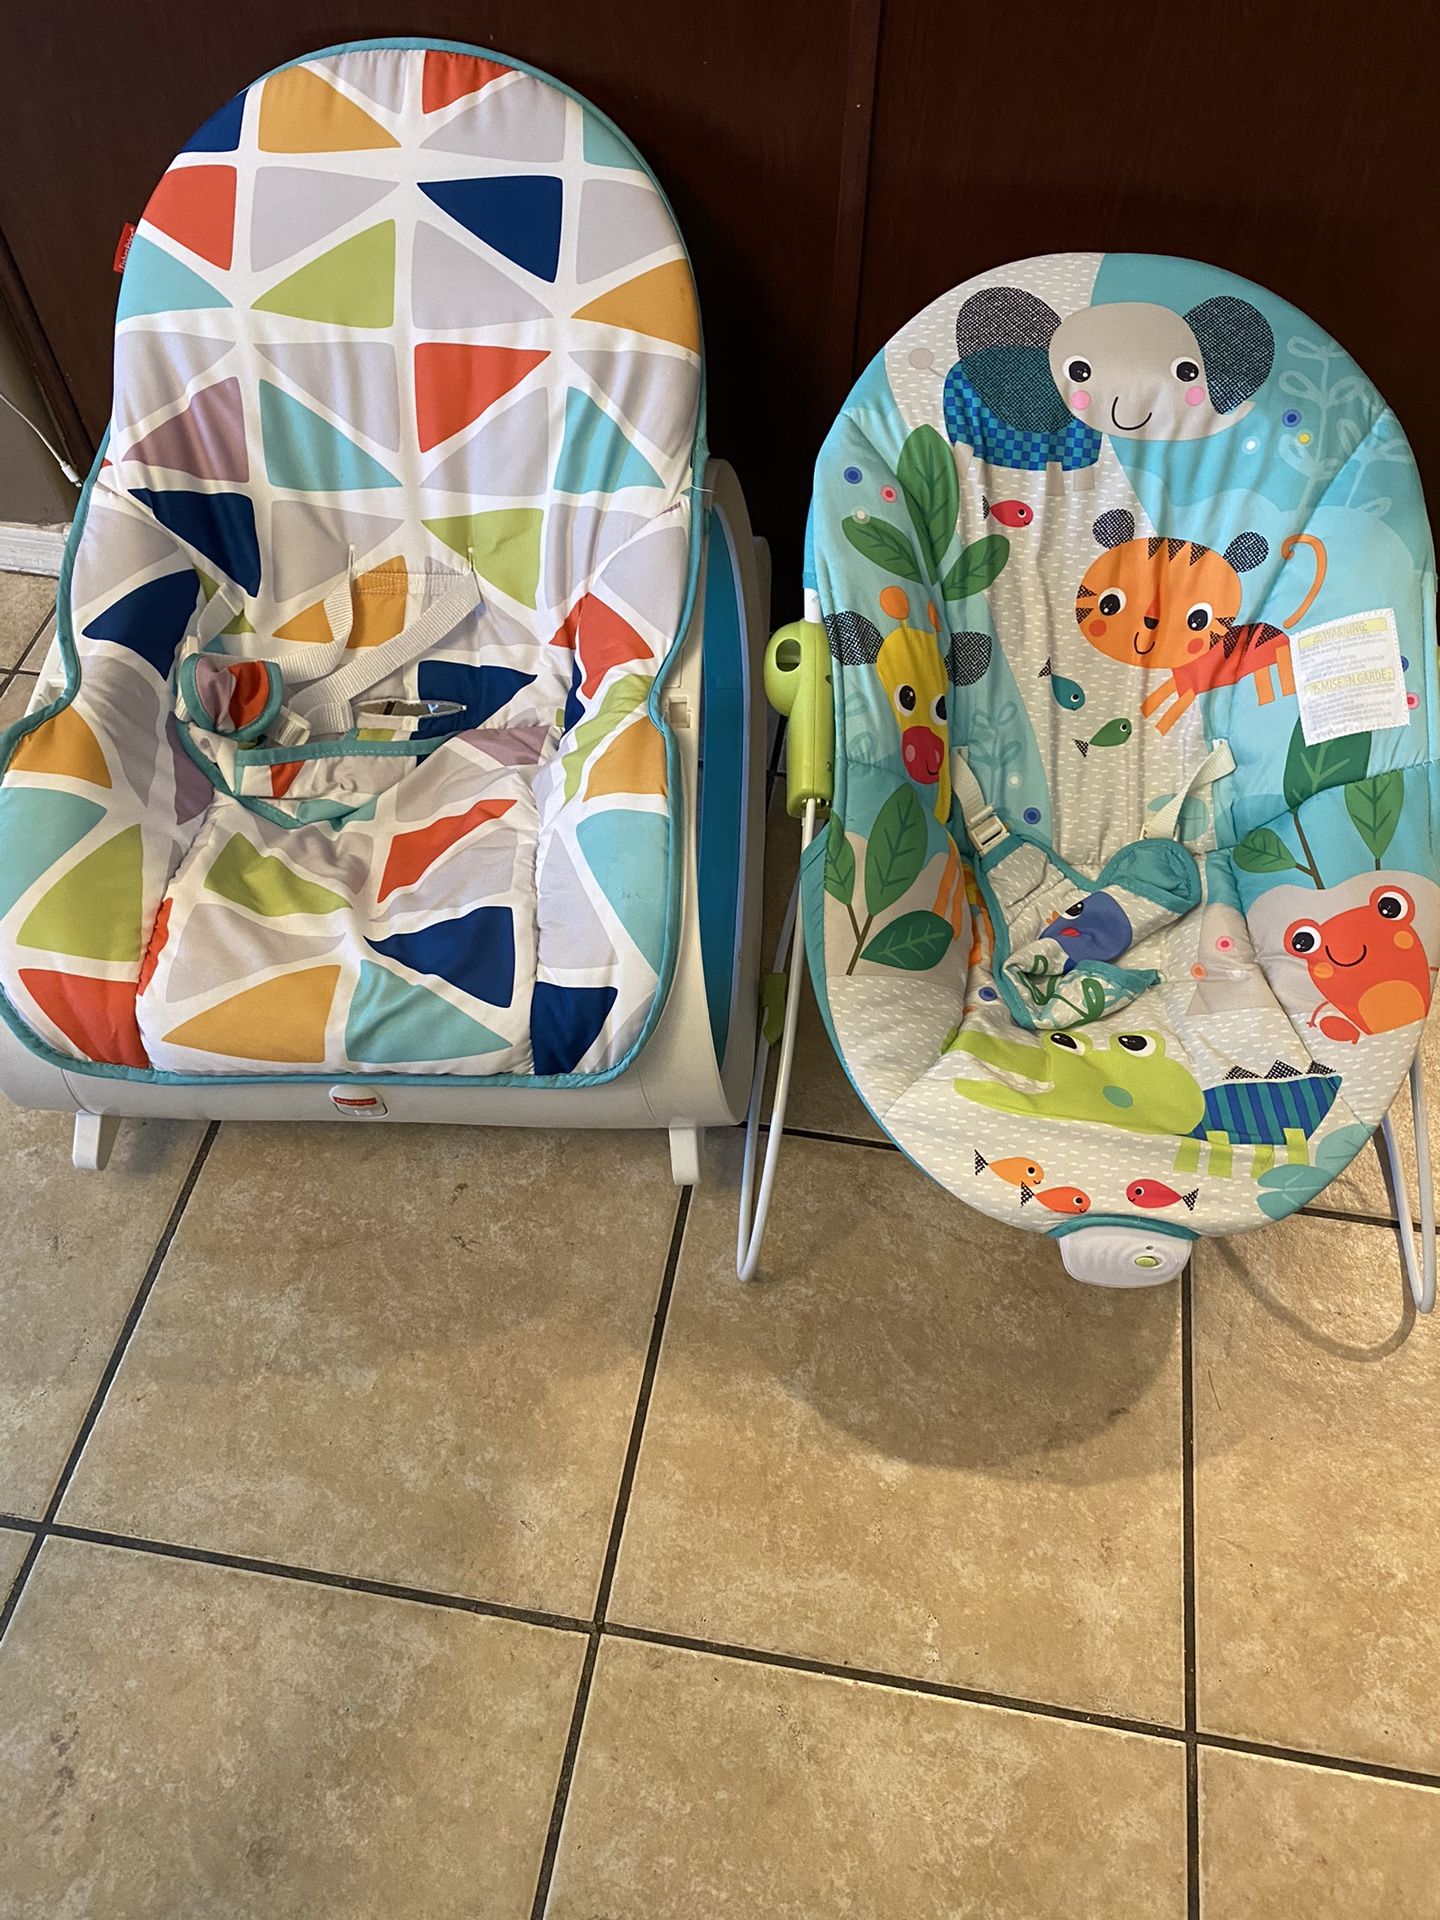 Baby Chairs 